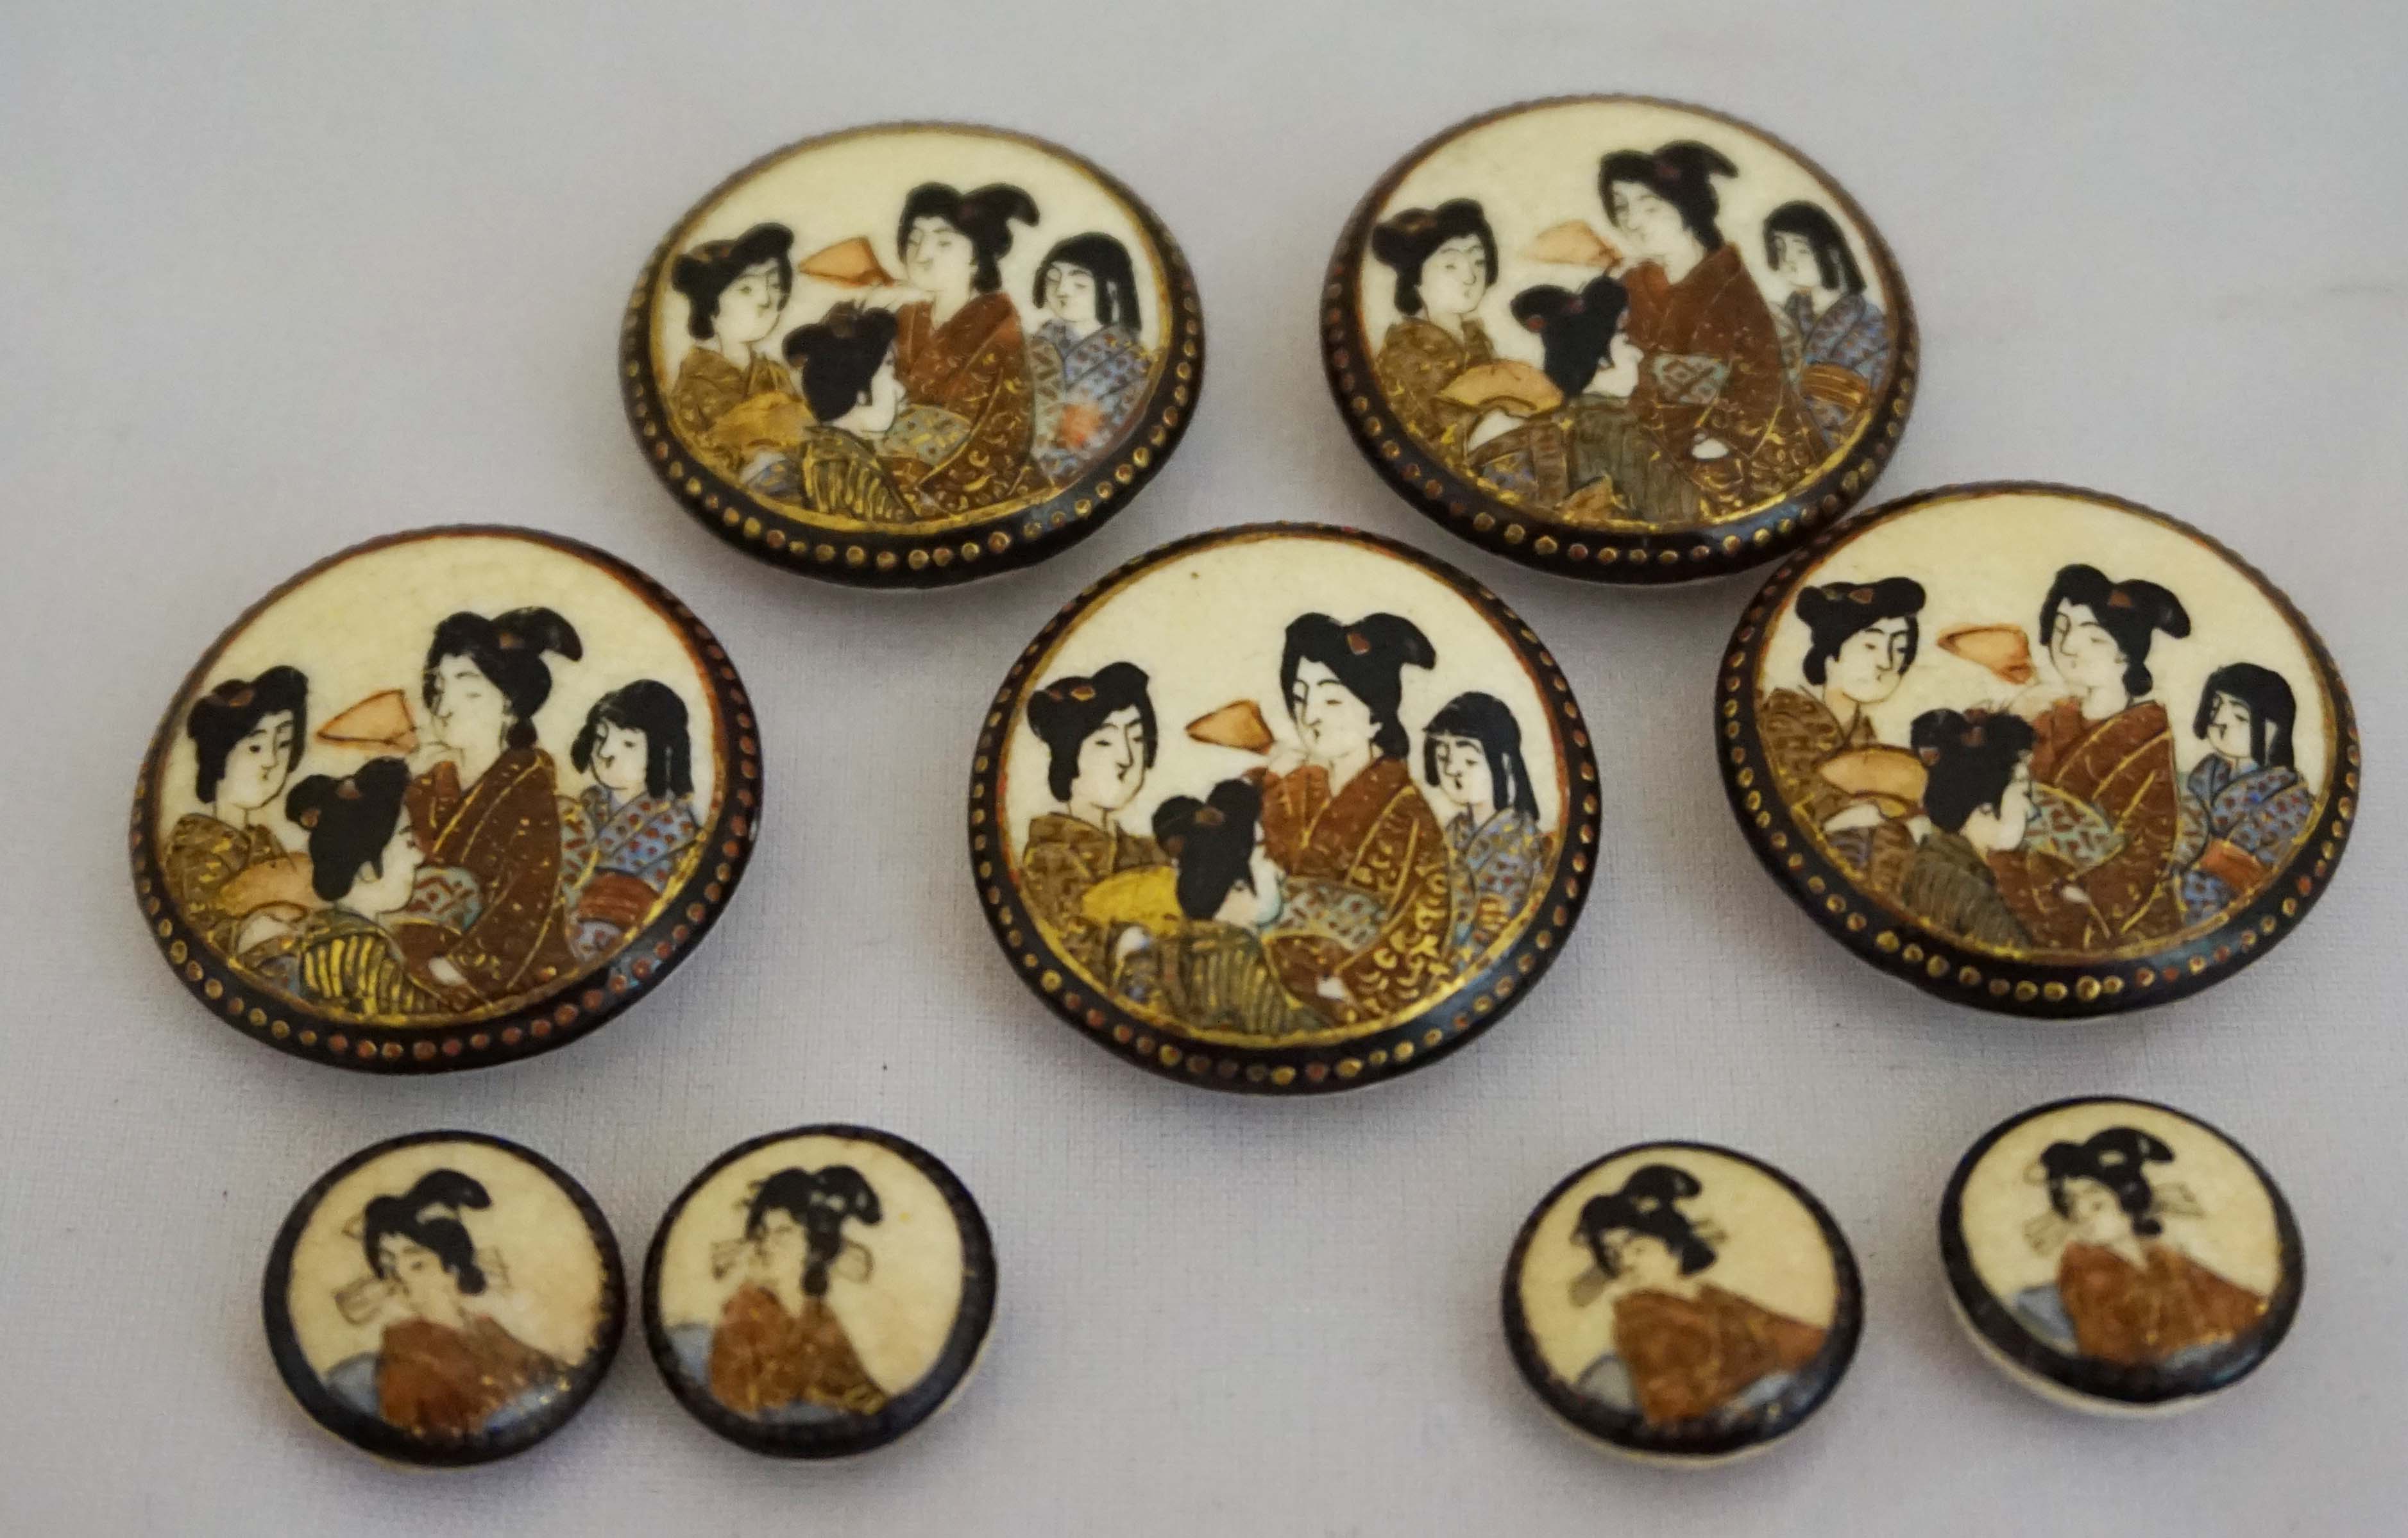 A collection of Japanese Satsuma buttons, Meiji Period (1868-1912) comprising five larger and four